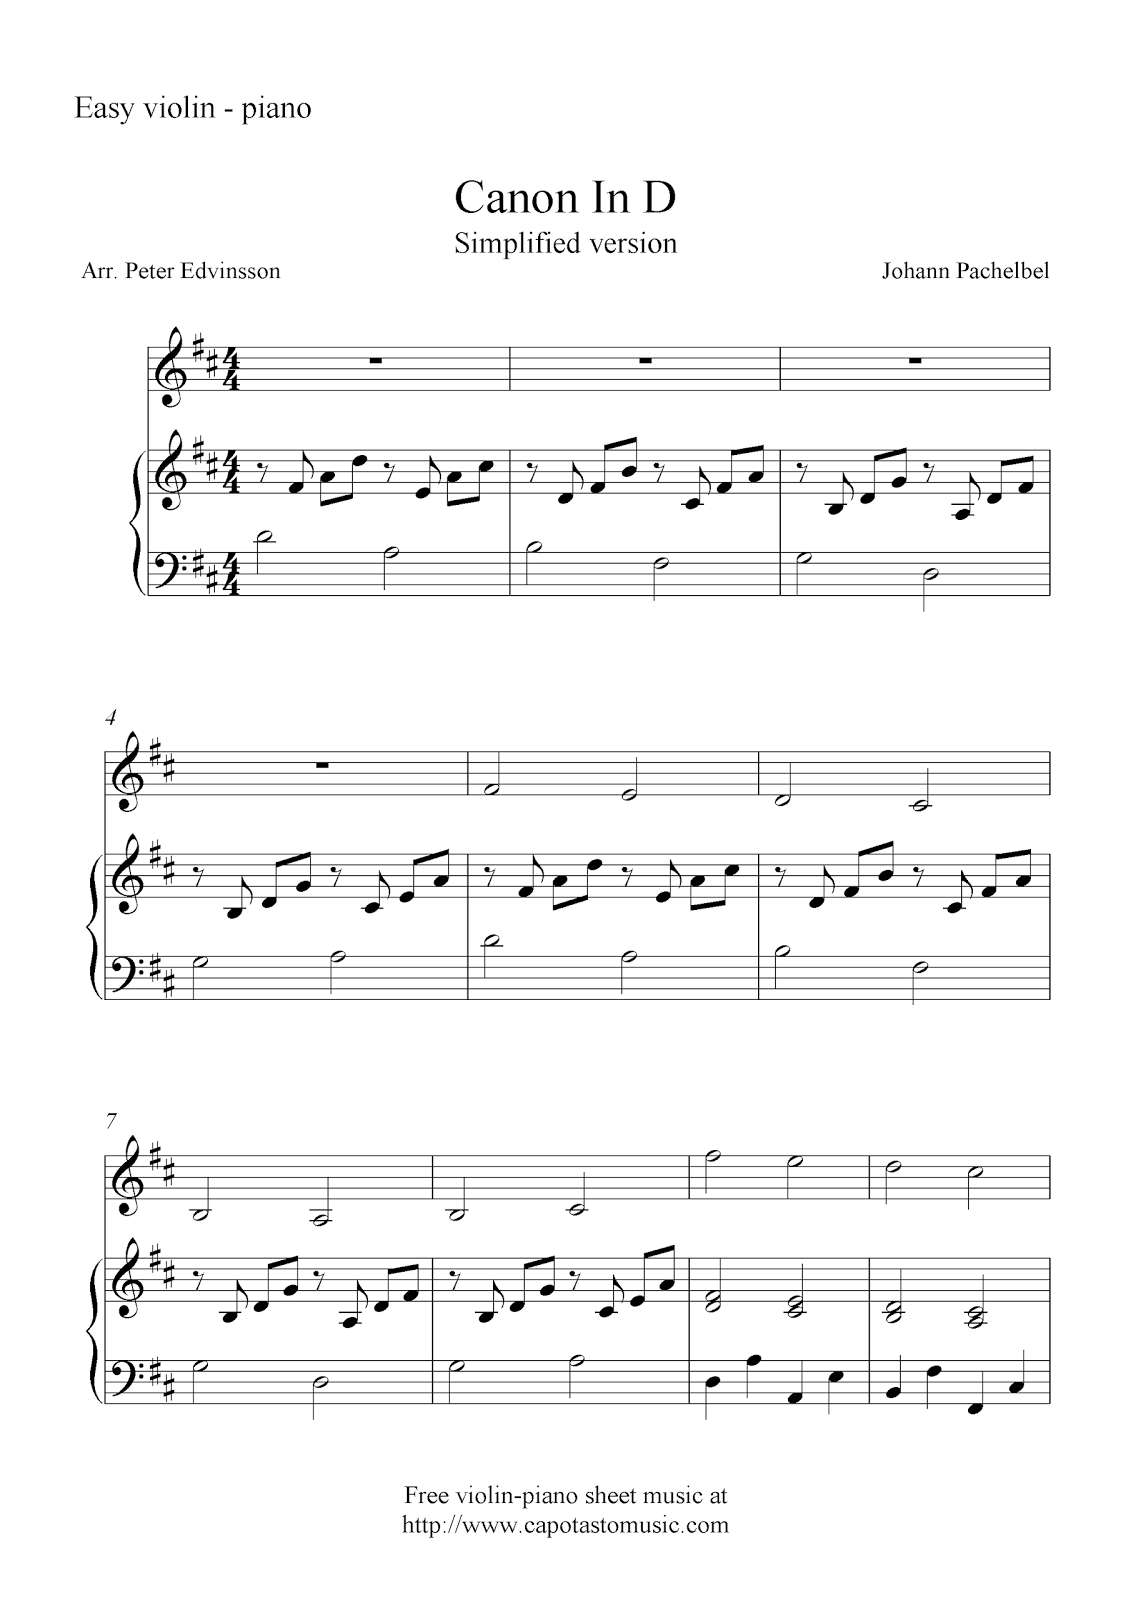 Canon In D (Simplified Version), Free Violin And Piano Sheet Music Notes - Canon In D Piano Sheet Music Free Printable